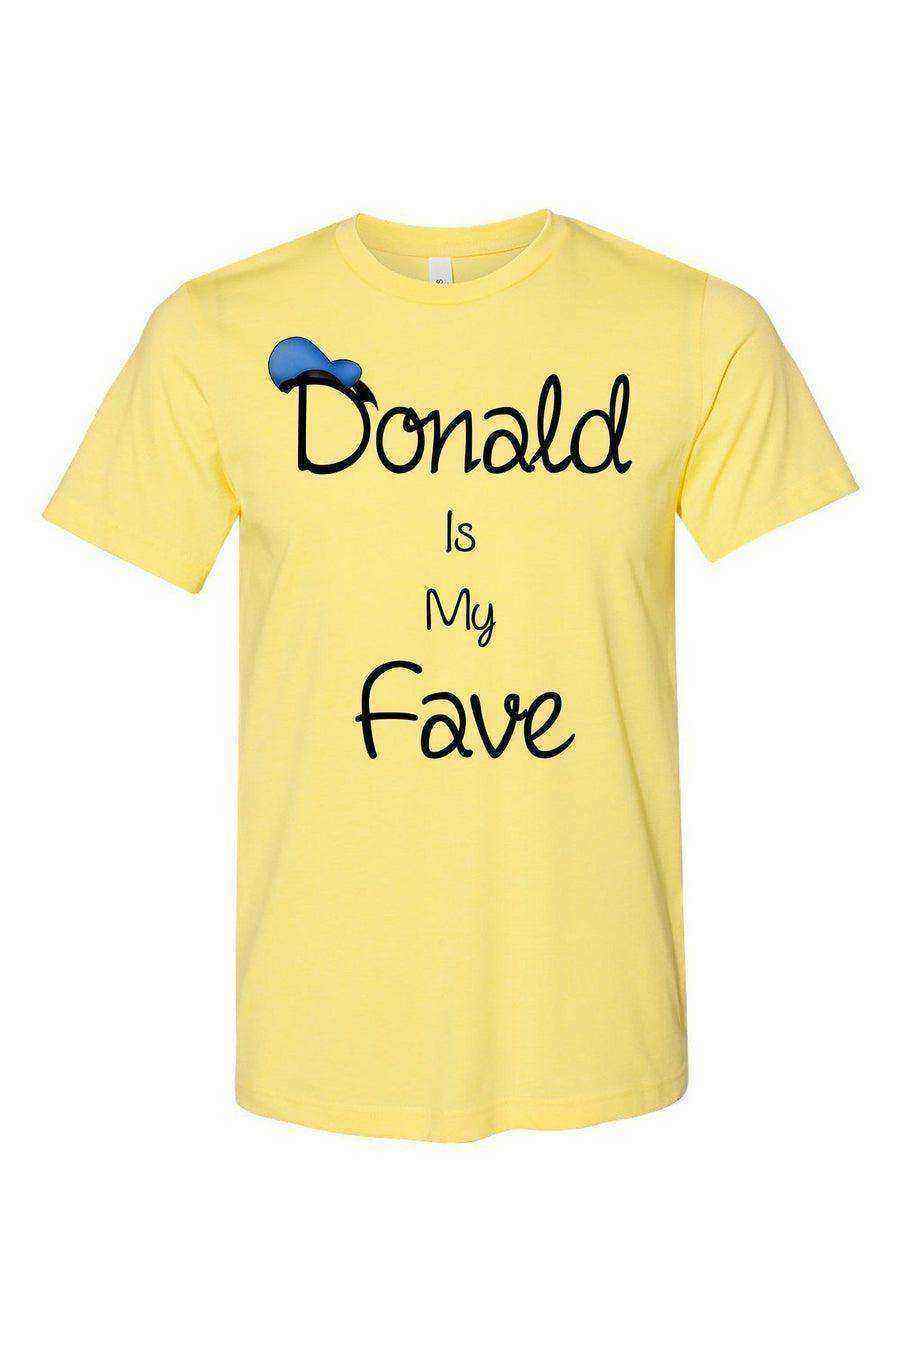 Donald is my Fave Shirt - Dylan's Tees